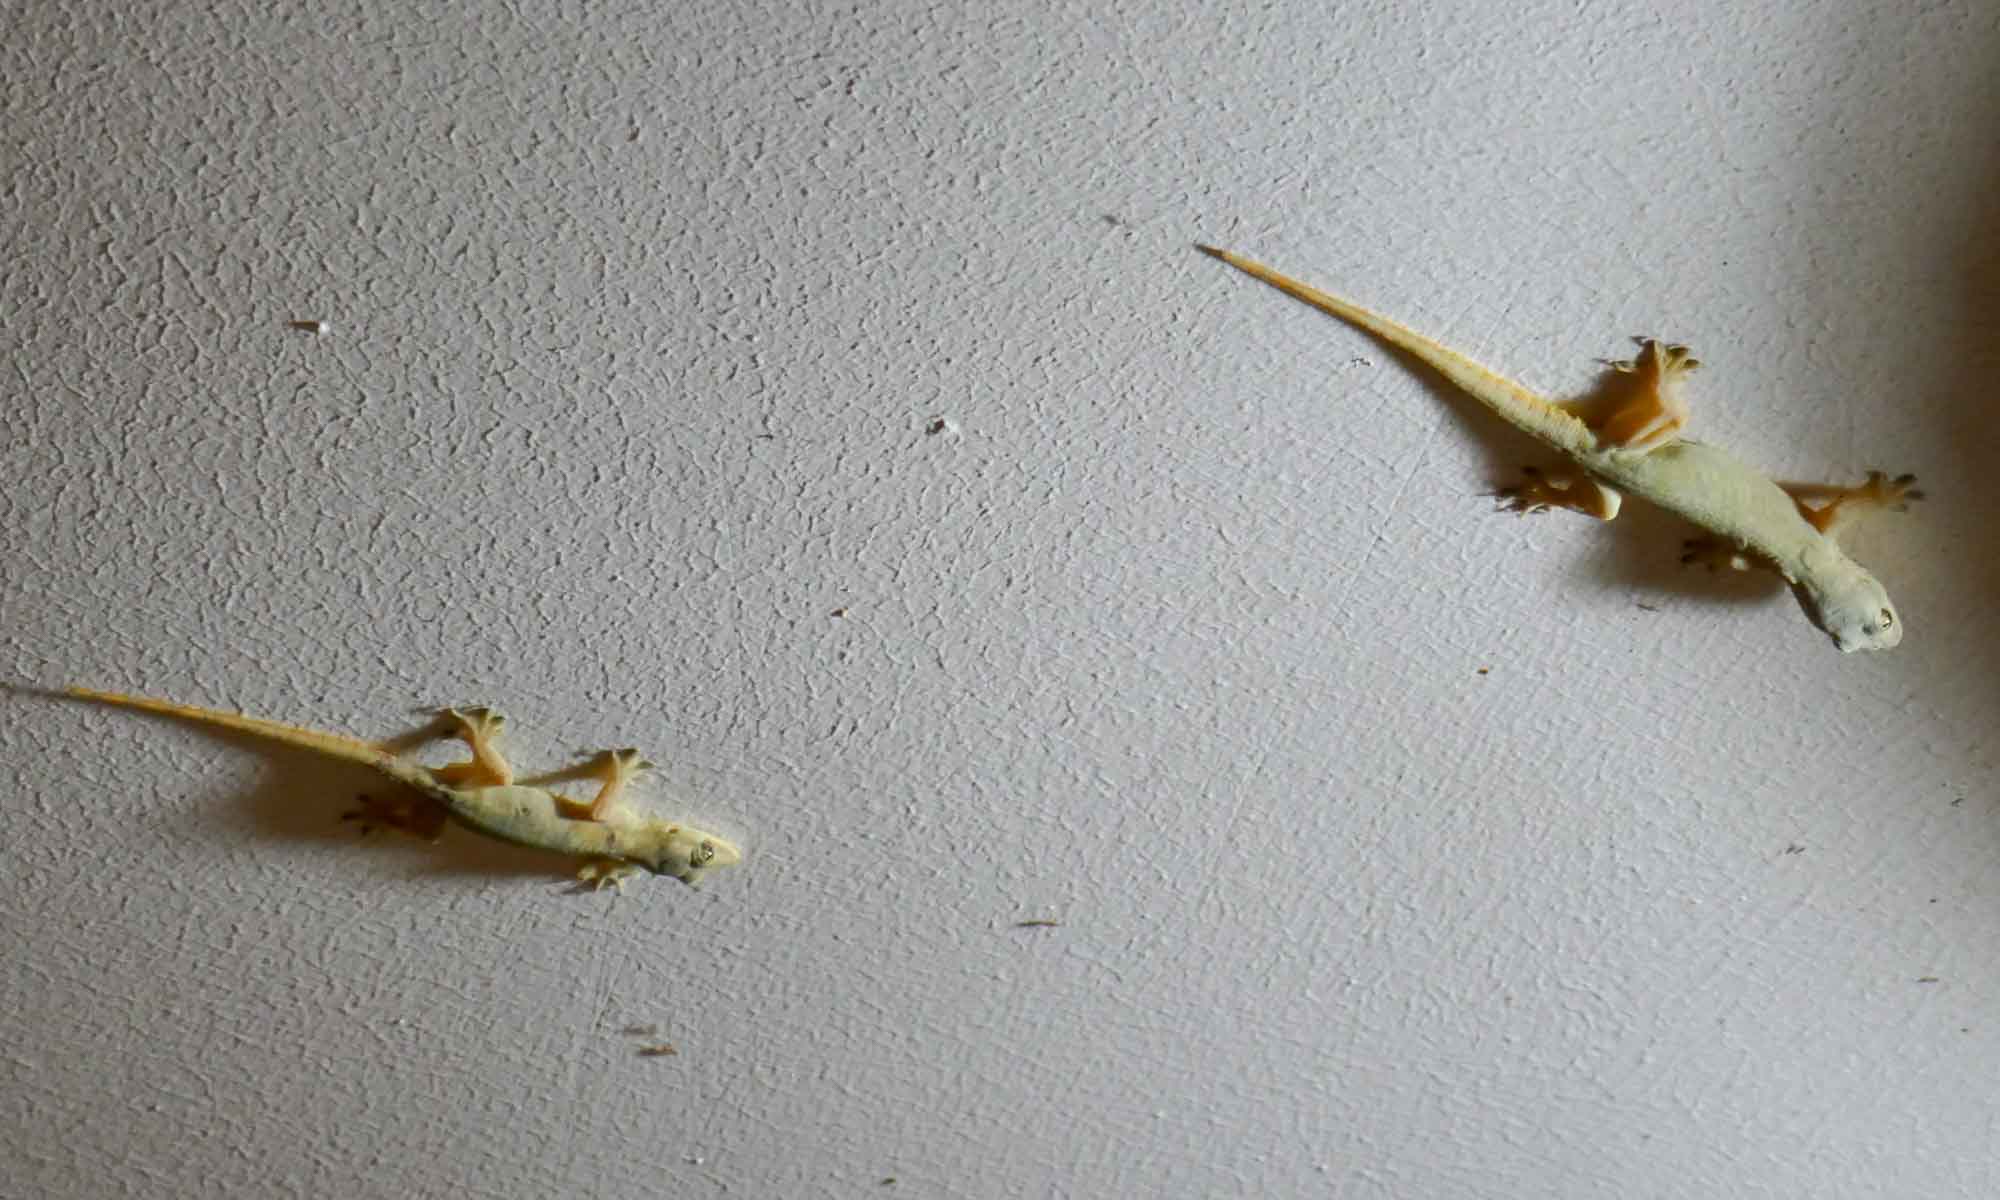 A lot of geckos (and their excrement) at the hotel